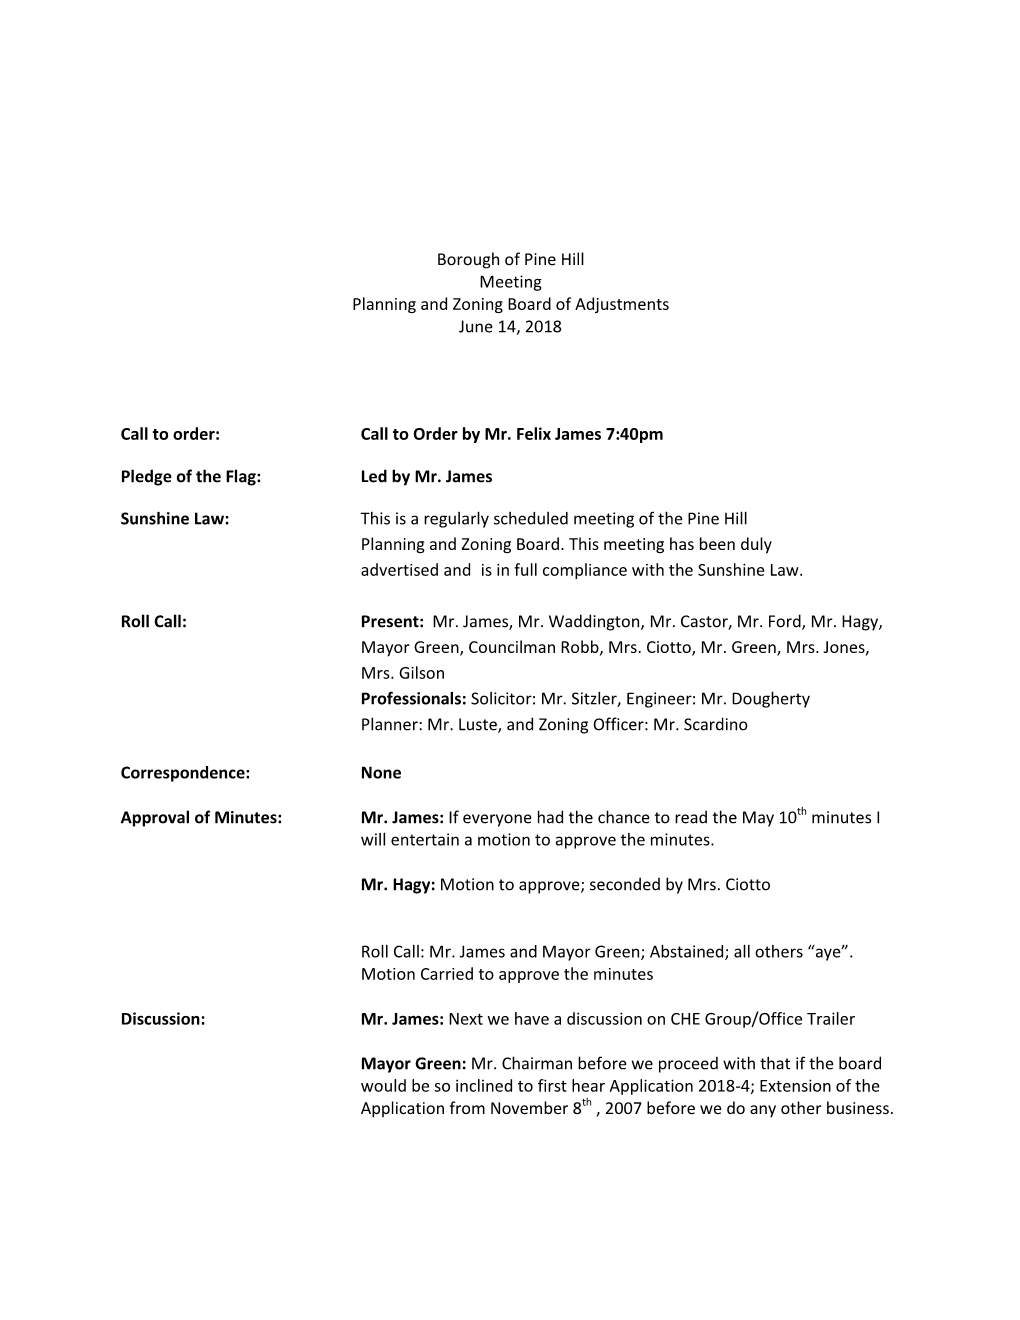 Borough of Pine Hill Meeting Planning and Zoning Board of Adjustments June 14, 2018